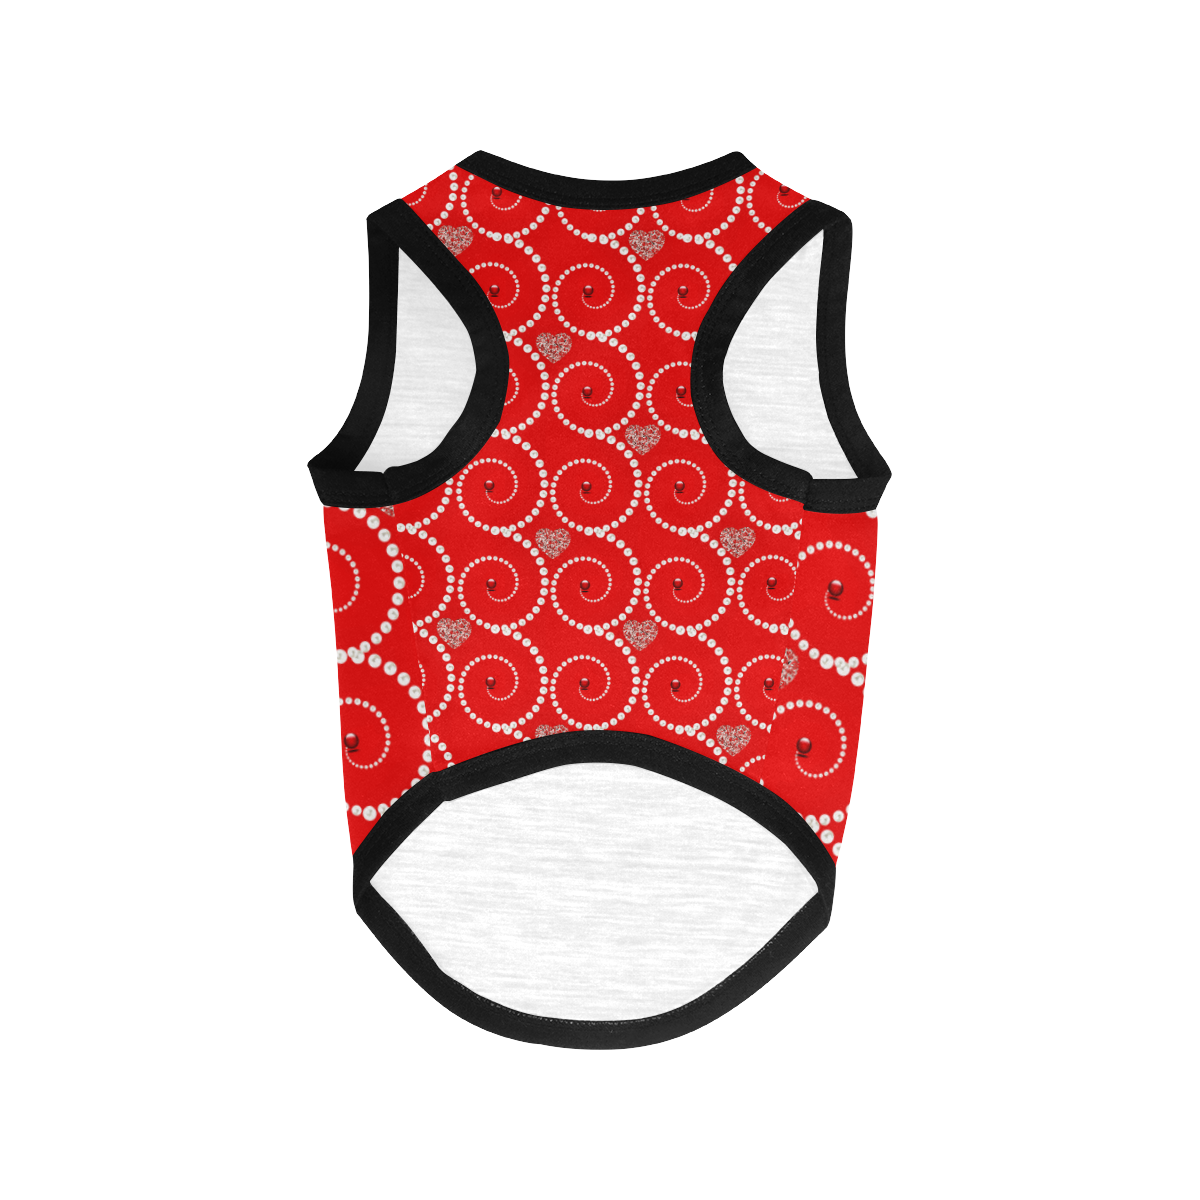 Silver hearts and pearls of white -red dog coat All Over Print Pet Tank Top